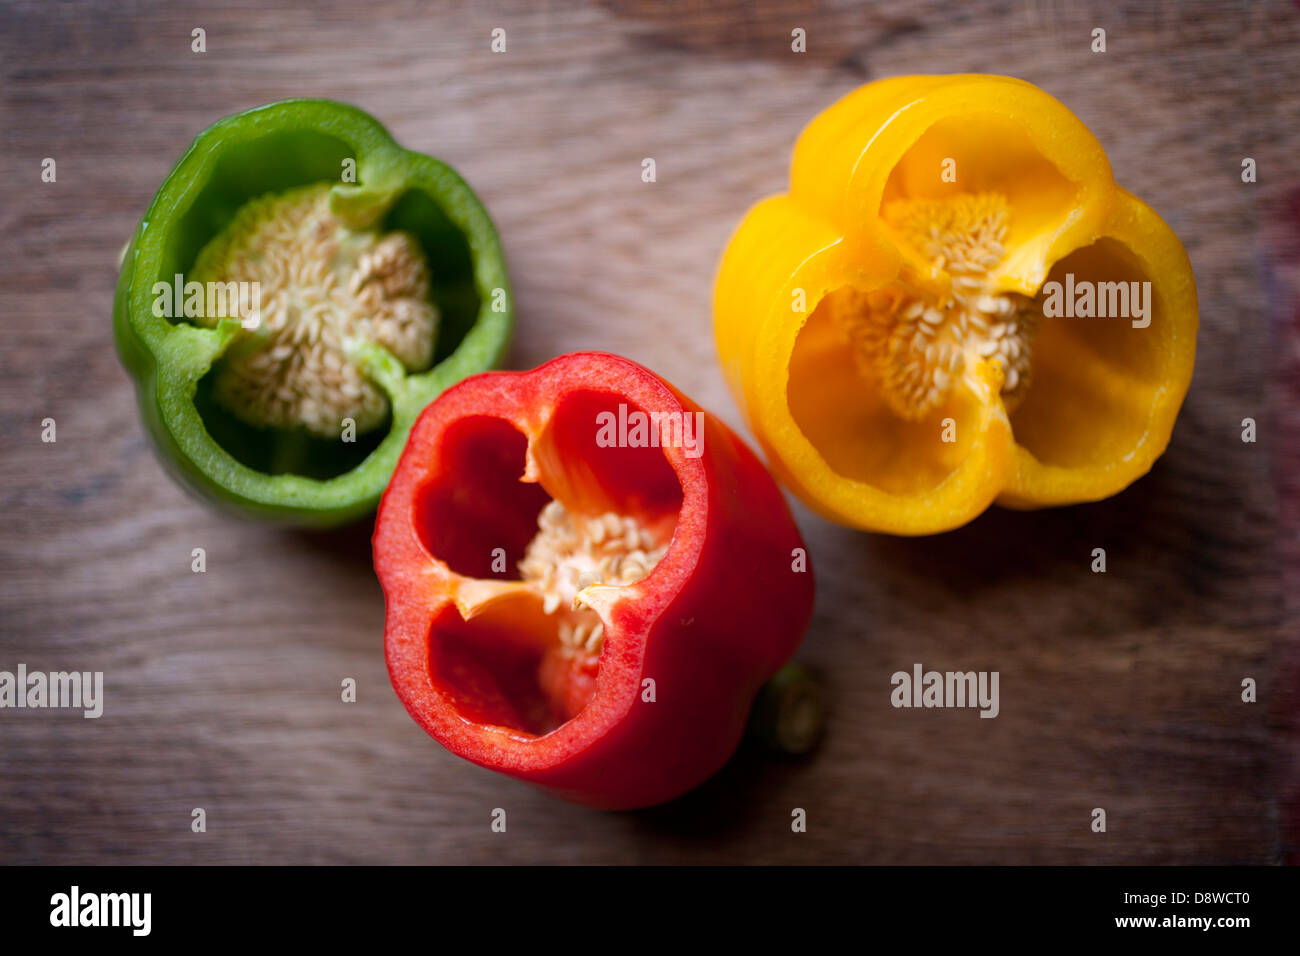 Green,yellow and red bell peppers Stock Photo